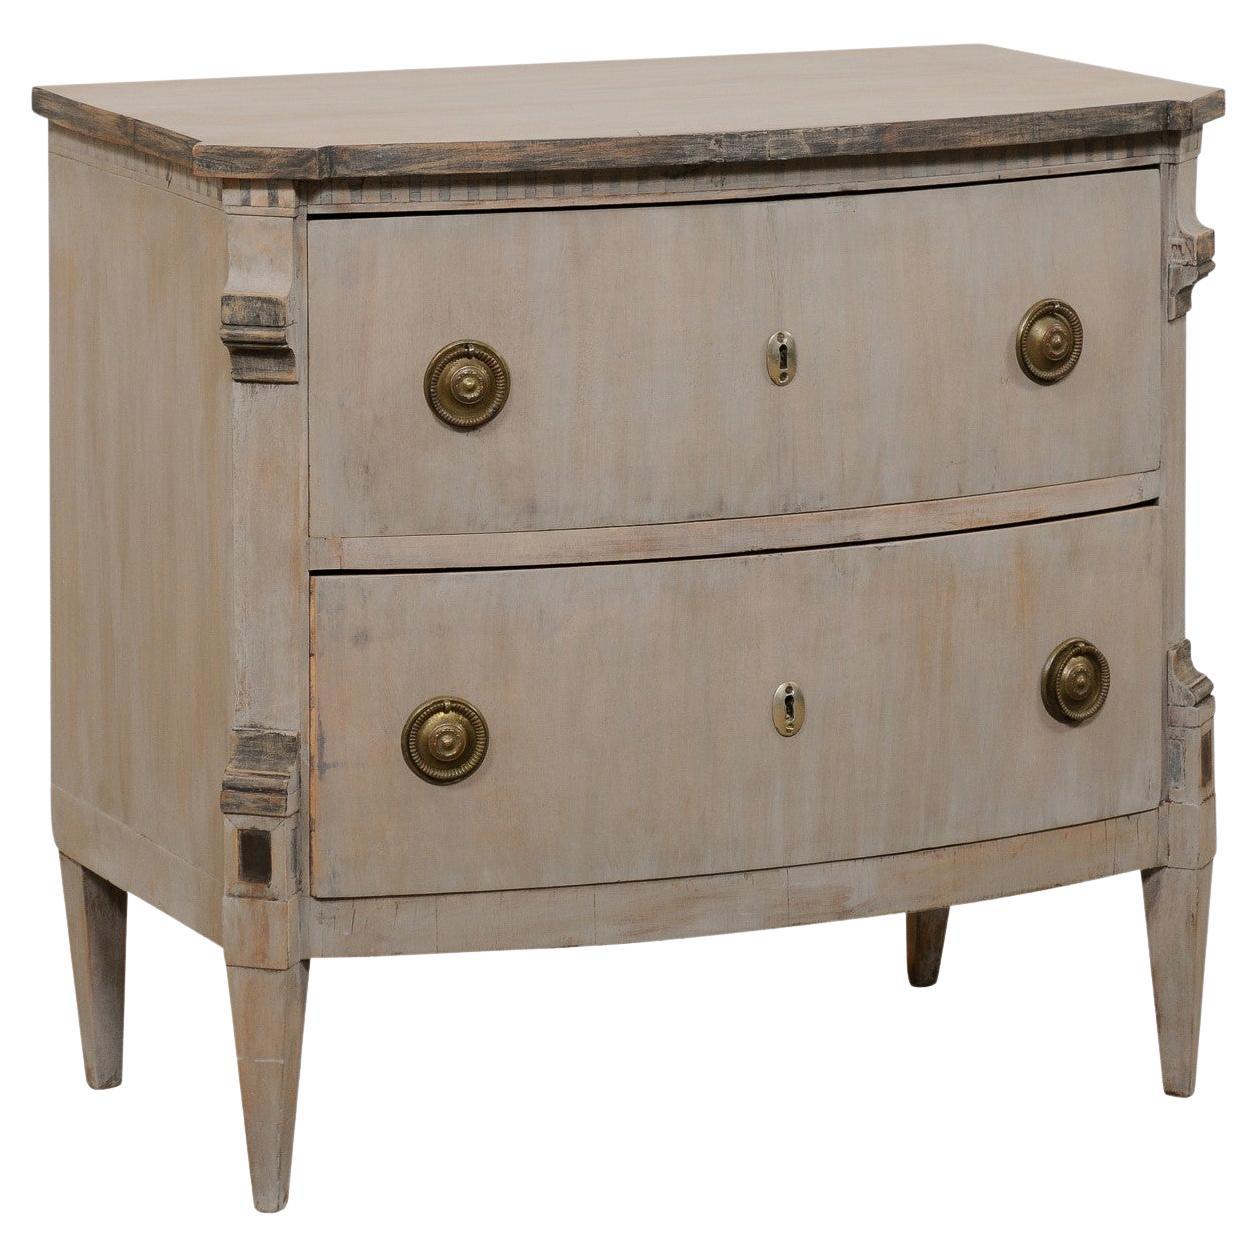 French 19th C. Neoclassical Bow-Front Commode in Blue/Gray w/Charcoal Trim For Sale